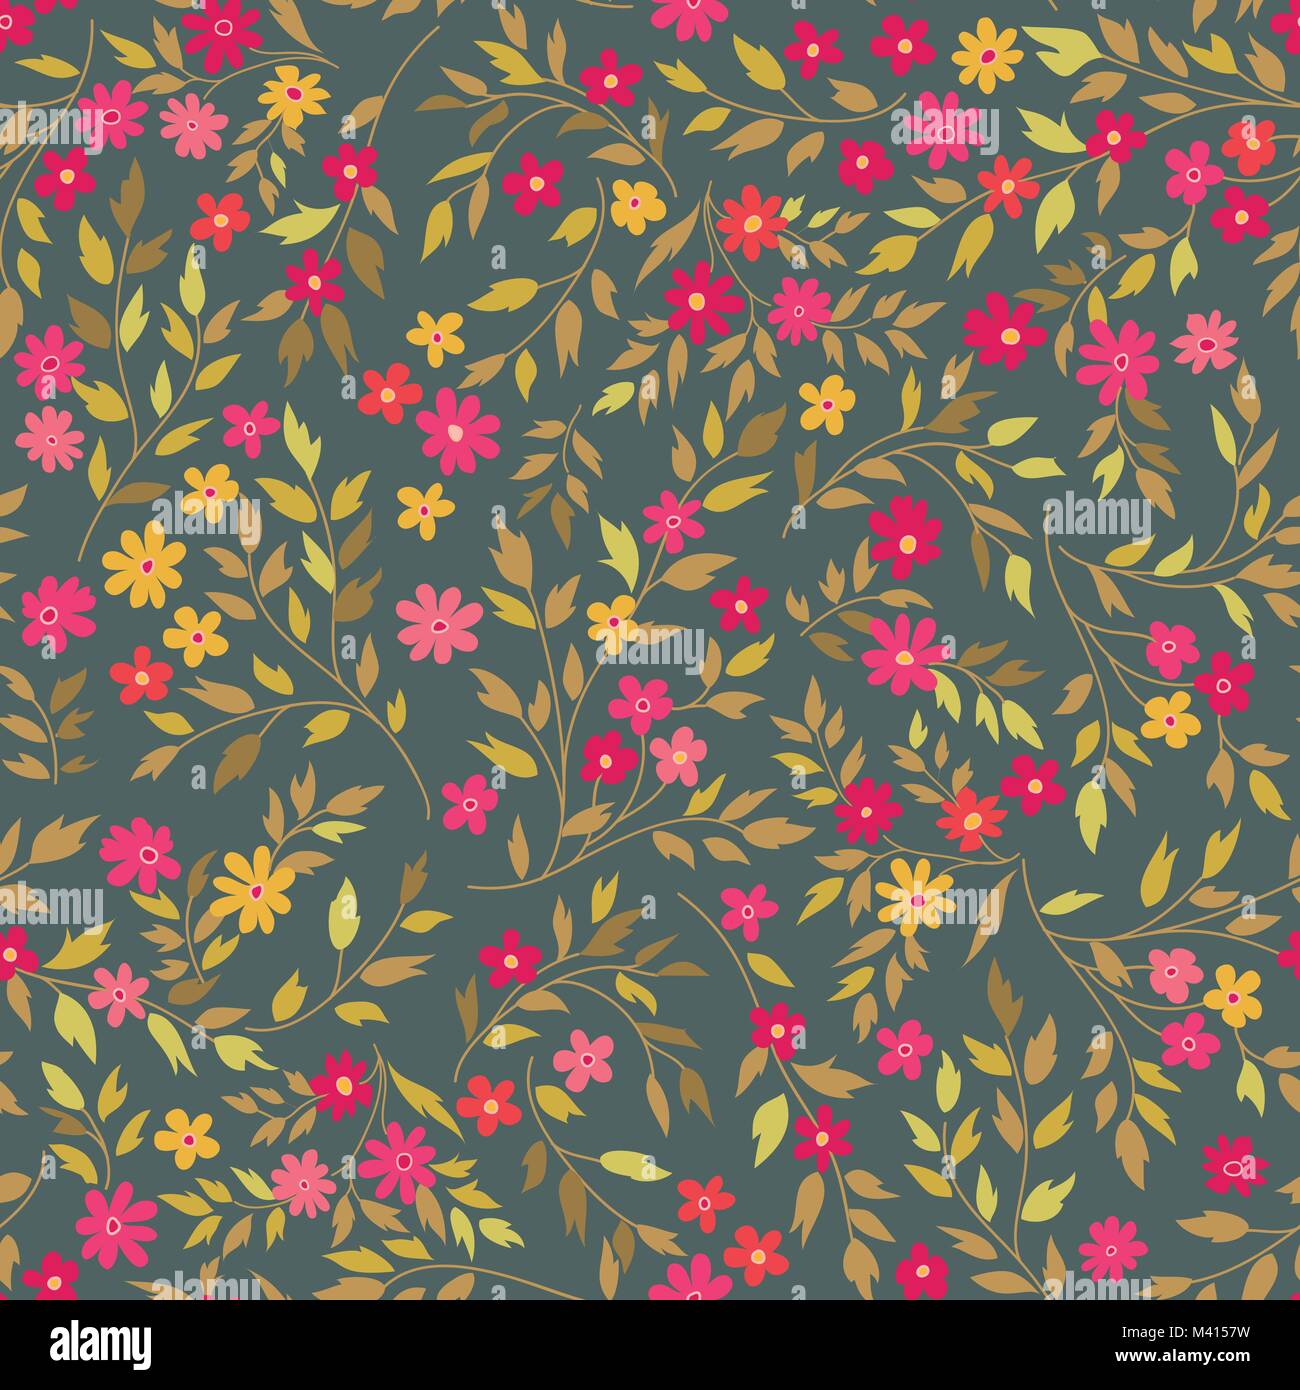 Floral seamless pattern. Flower background. Abstract ornamental flourish wallpaper with flowers. Stock Vector